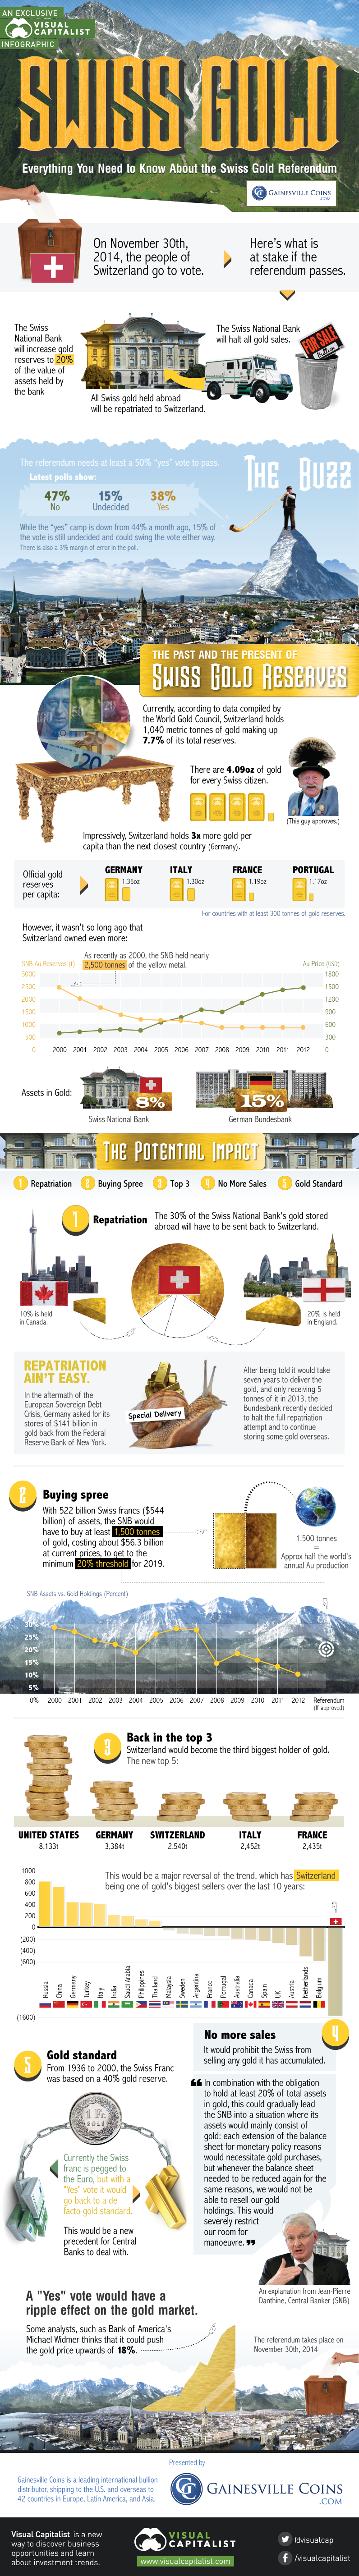 Everything You Need to Know About the Swiss Gold Referendum